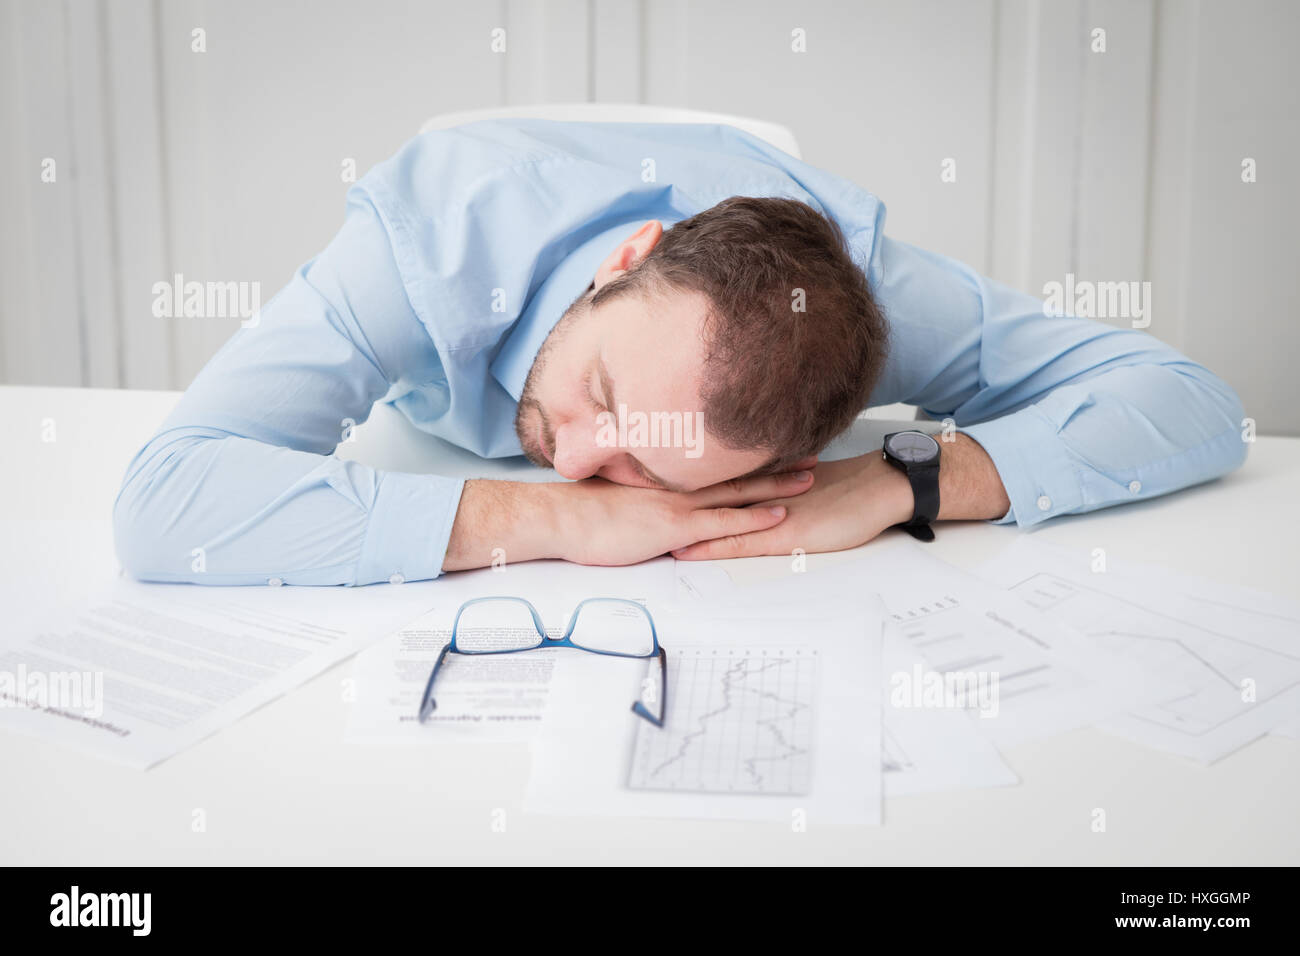 Tired businessman sleeping at the office desk Stock Photo